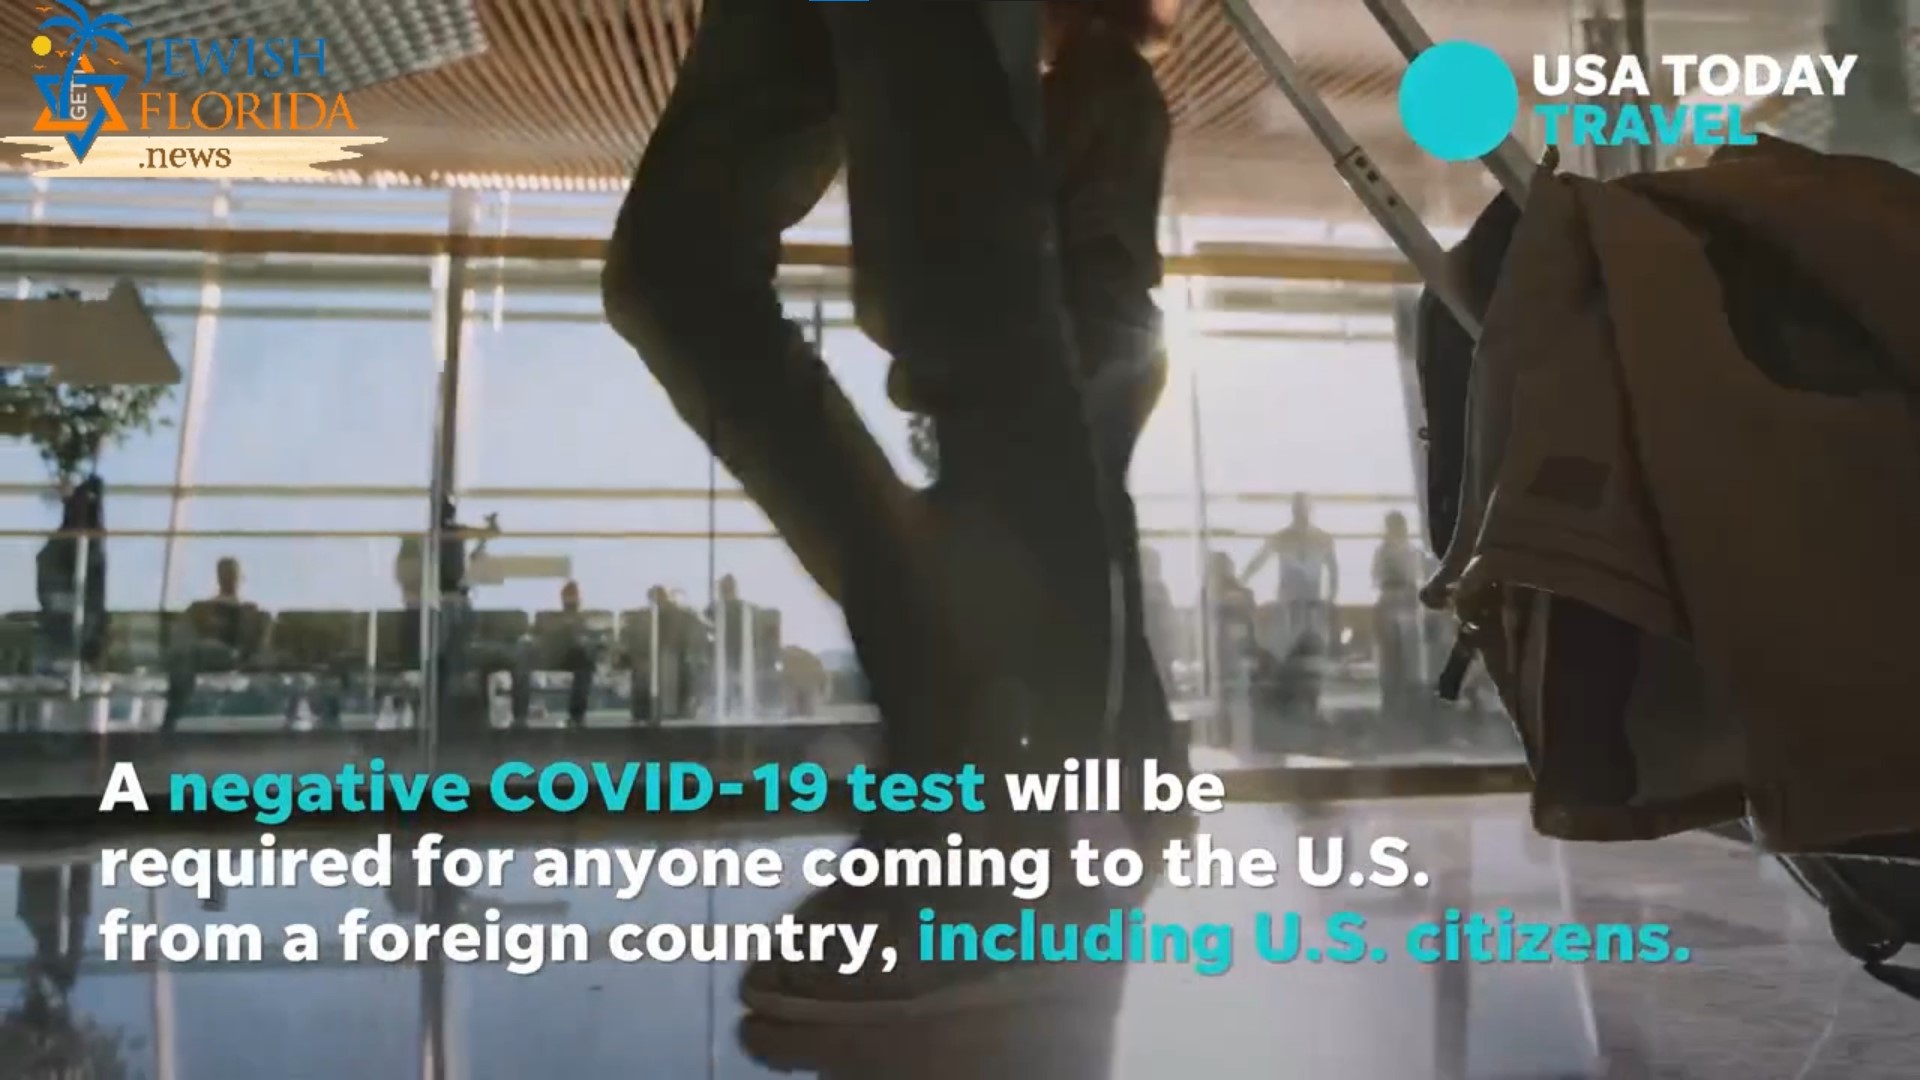 New COVID-19 test requirement for international flights to the US begins; are travelers (and airlines) ready?